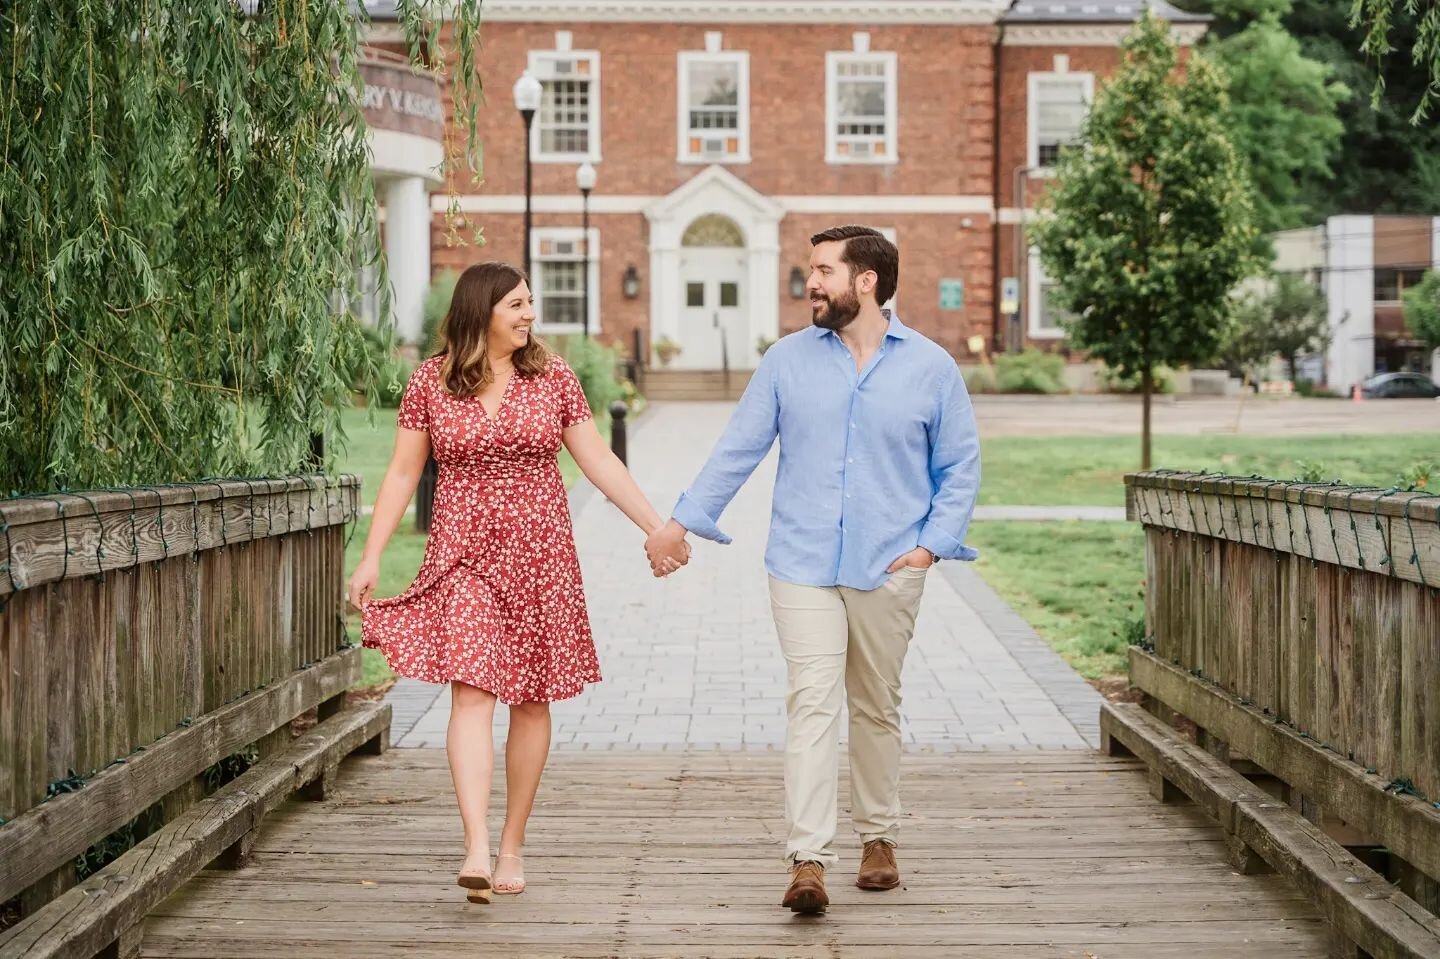 Just when I thought my passion for capturing intimate moments couldn't grow any stronger, Allie and Mike's engagement session happened! 📸💕 From the enchanting streets of Mount Kisco to the cozy corners of @pour_mtkisco , we embarked on an adventure